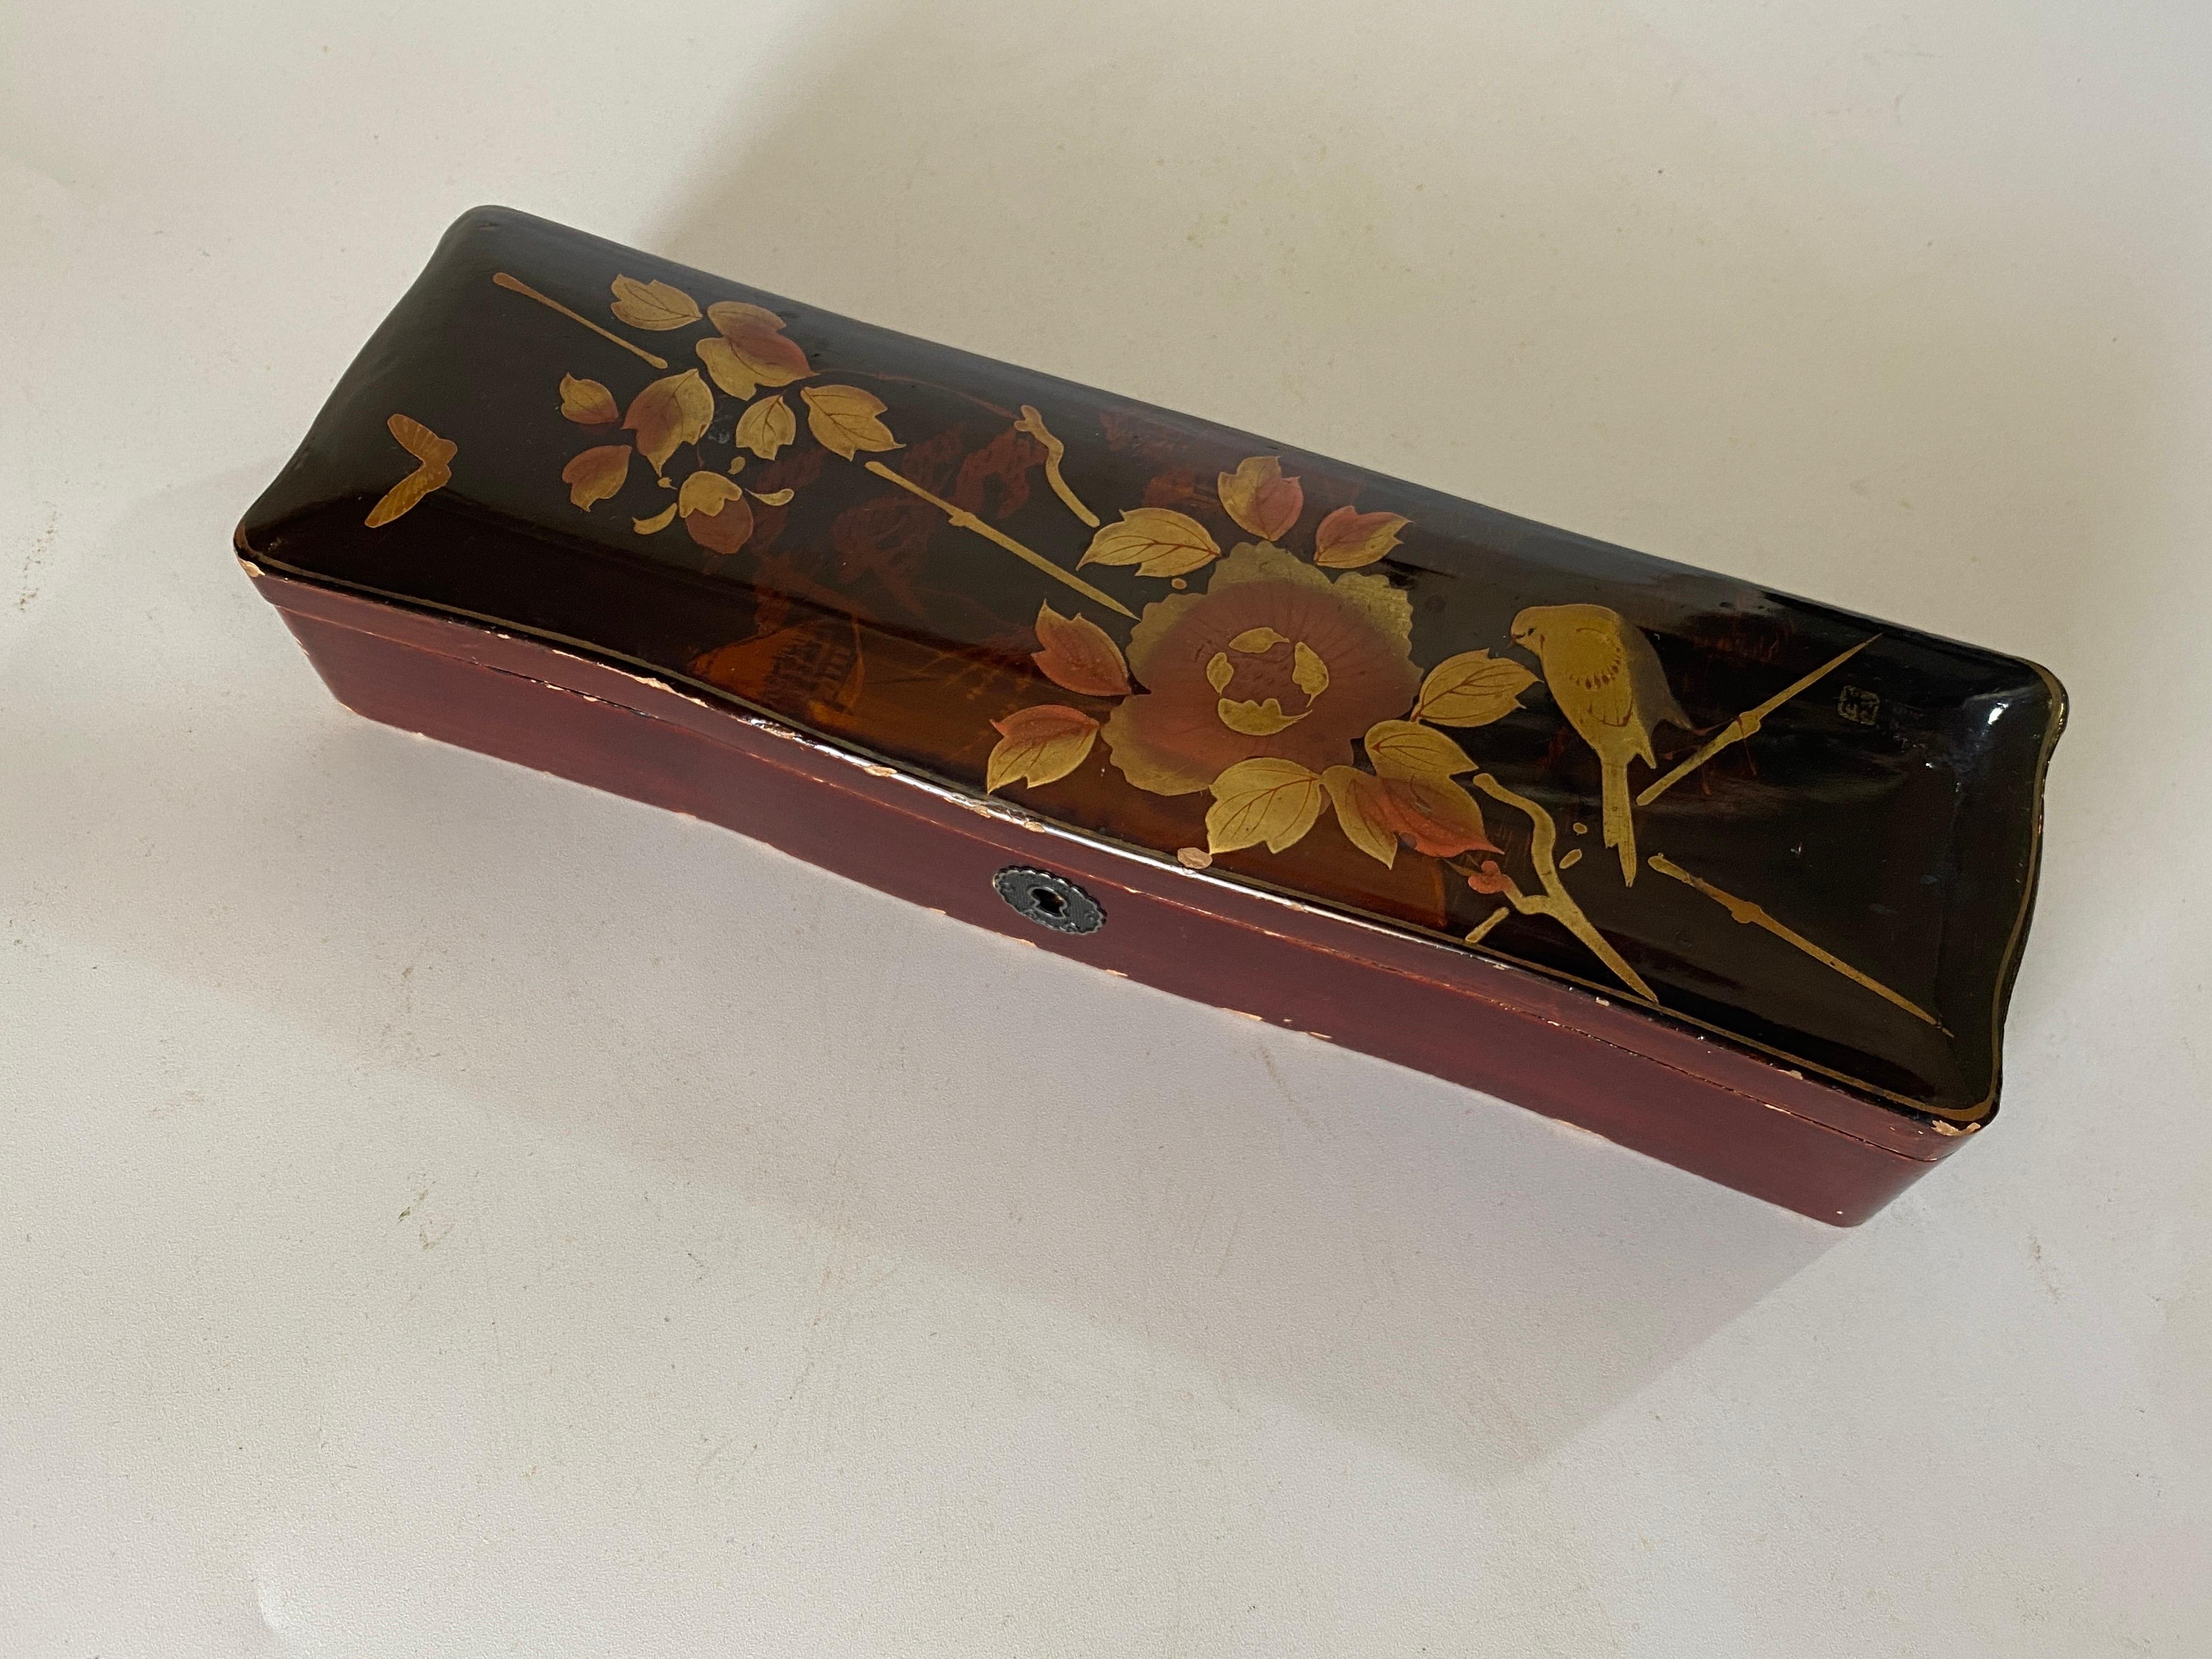 Red Japanese Lacquered Box Meiji Decorative Box, circa 1880 In Fair Condition For Sale In Auribeau sur Siagne, FR